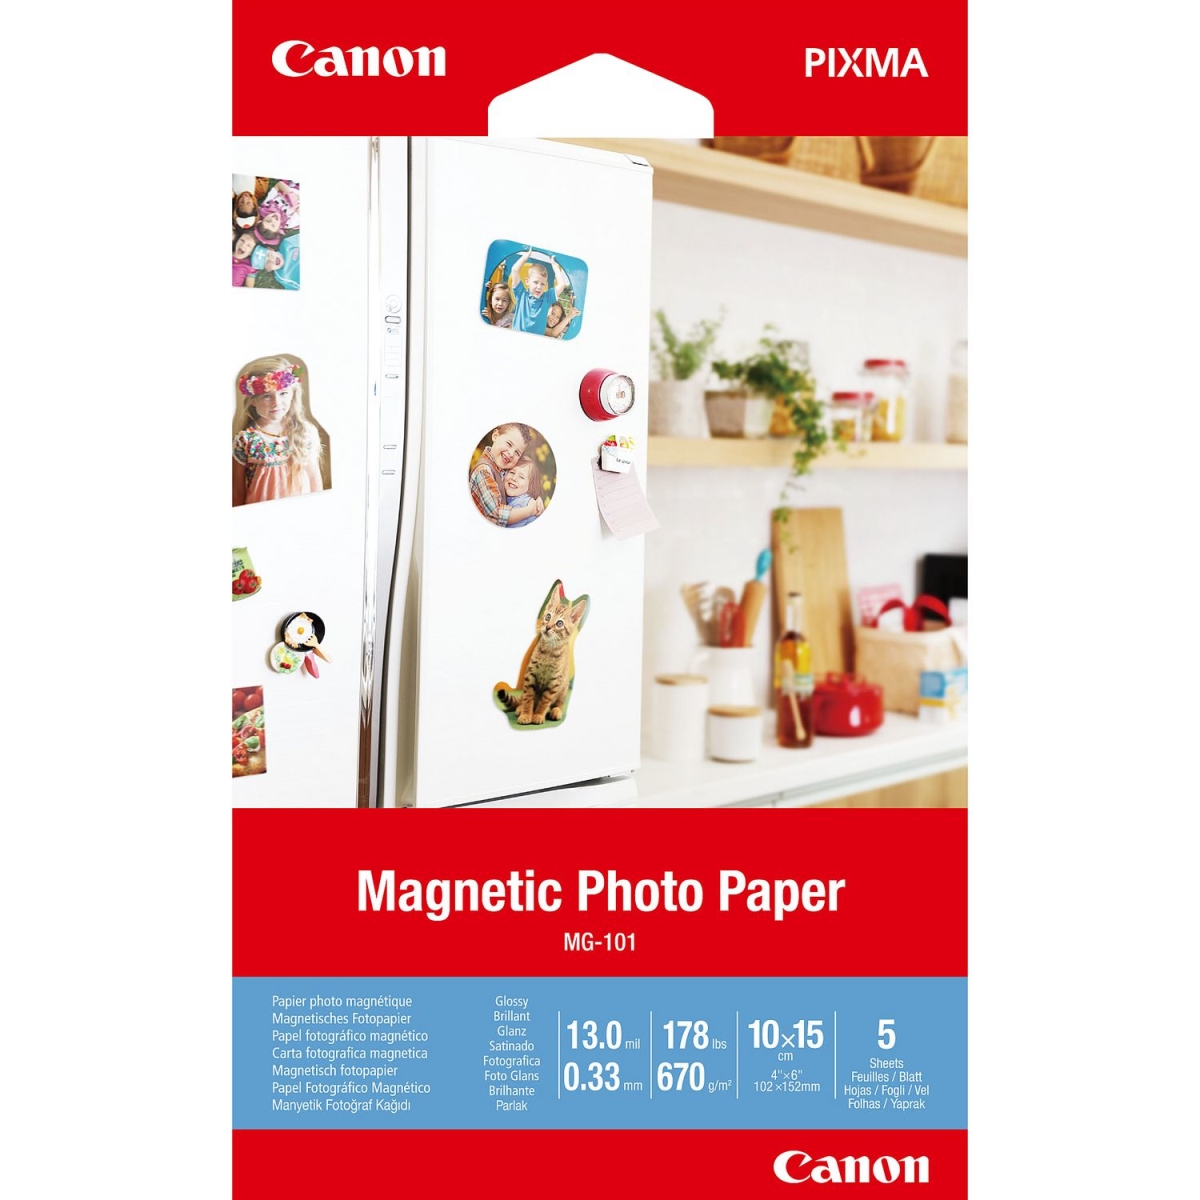 Canon 3634C002 4 x 6 MG-101 Glossy Magnetic Photo Paper, White - 5 Sheets per Pack